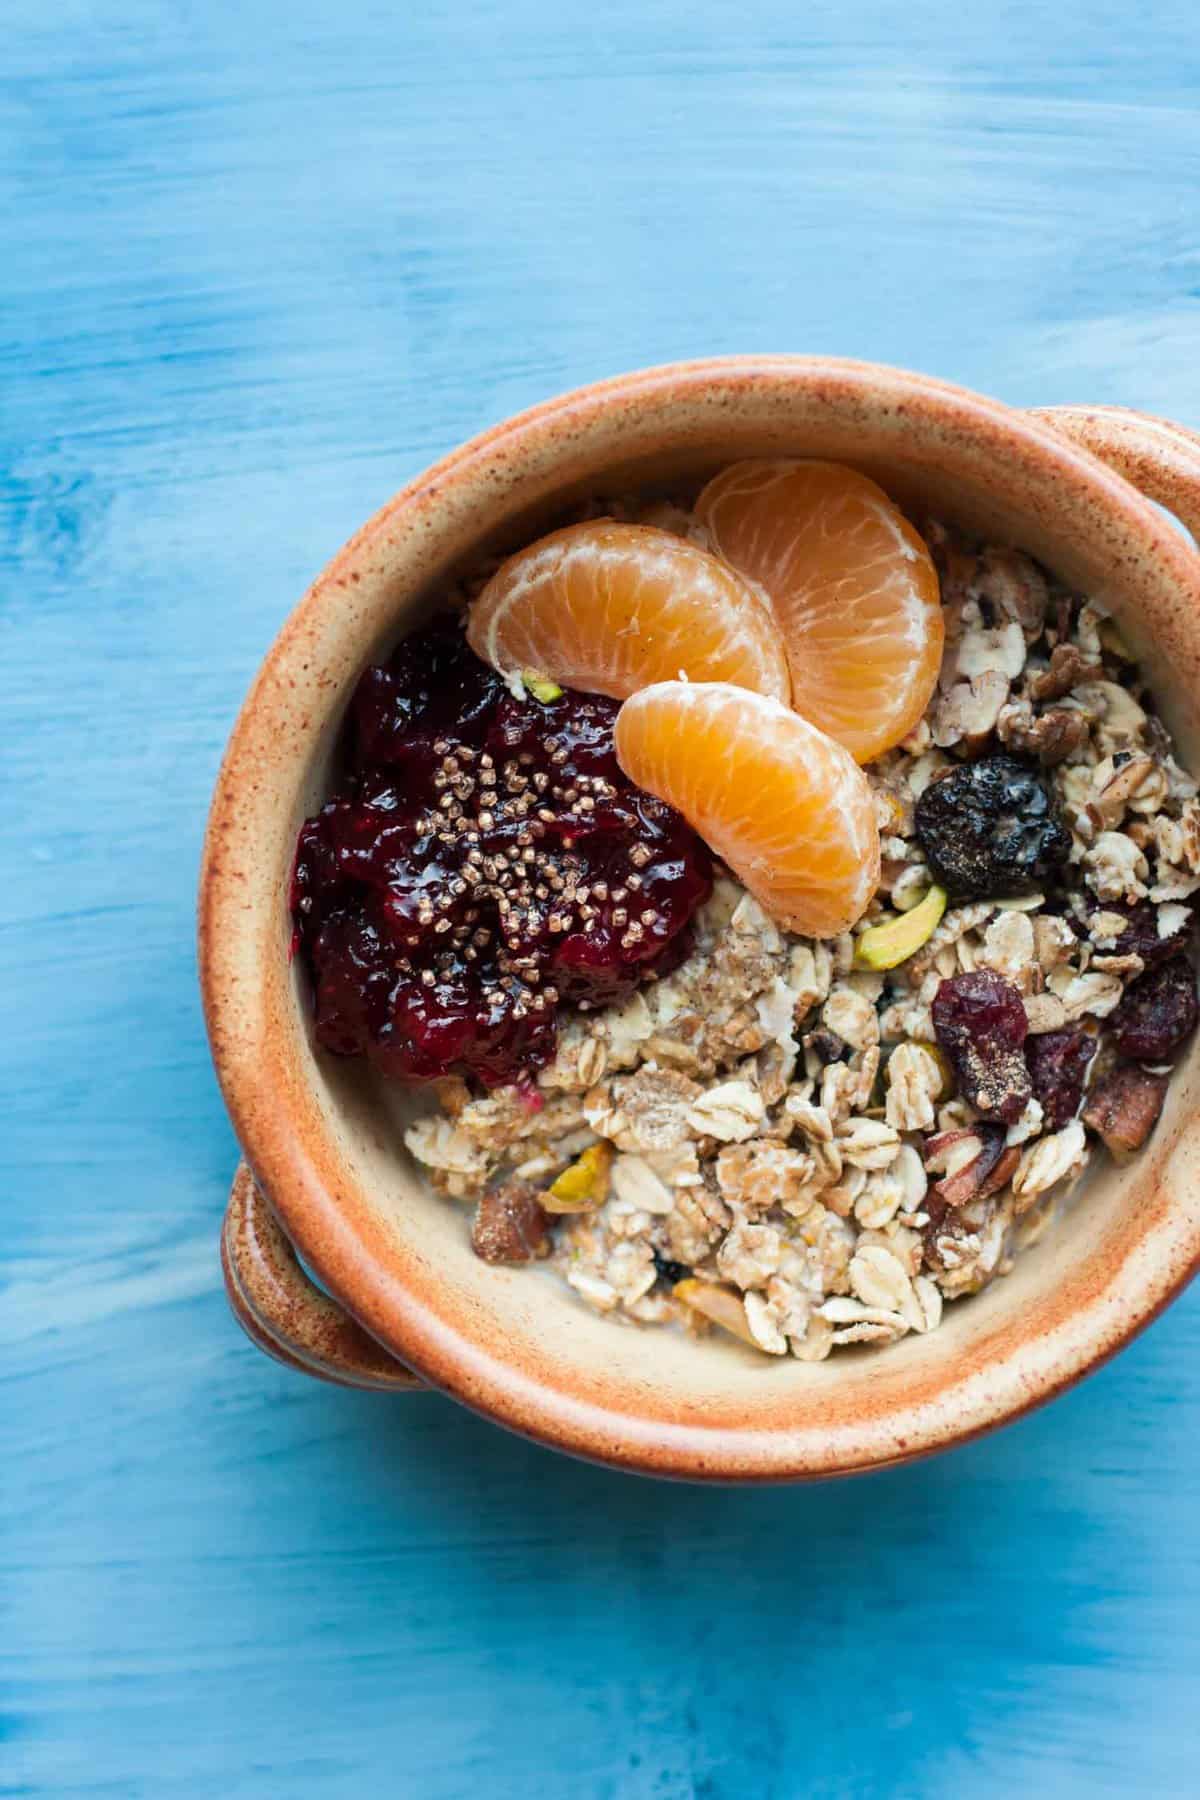 Christmas Muesli - this festive spiced muesli makes for a delicious breakfast and a lovely edible gift! | eatloveeats.com